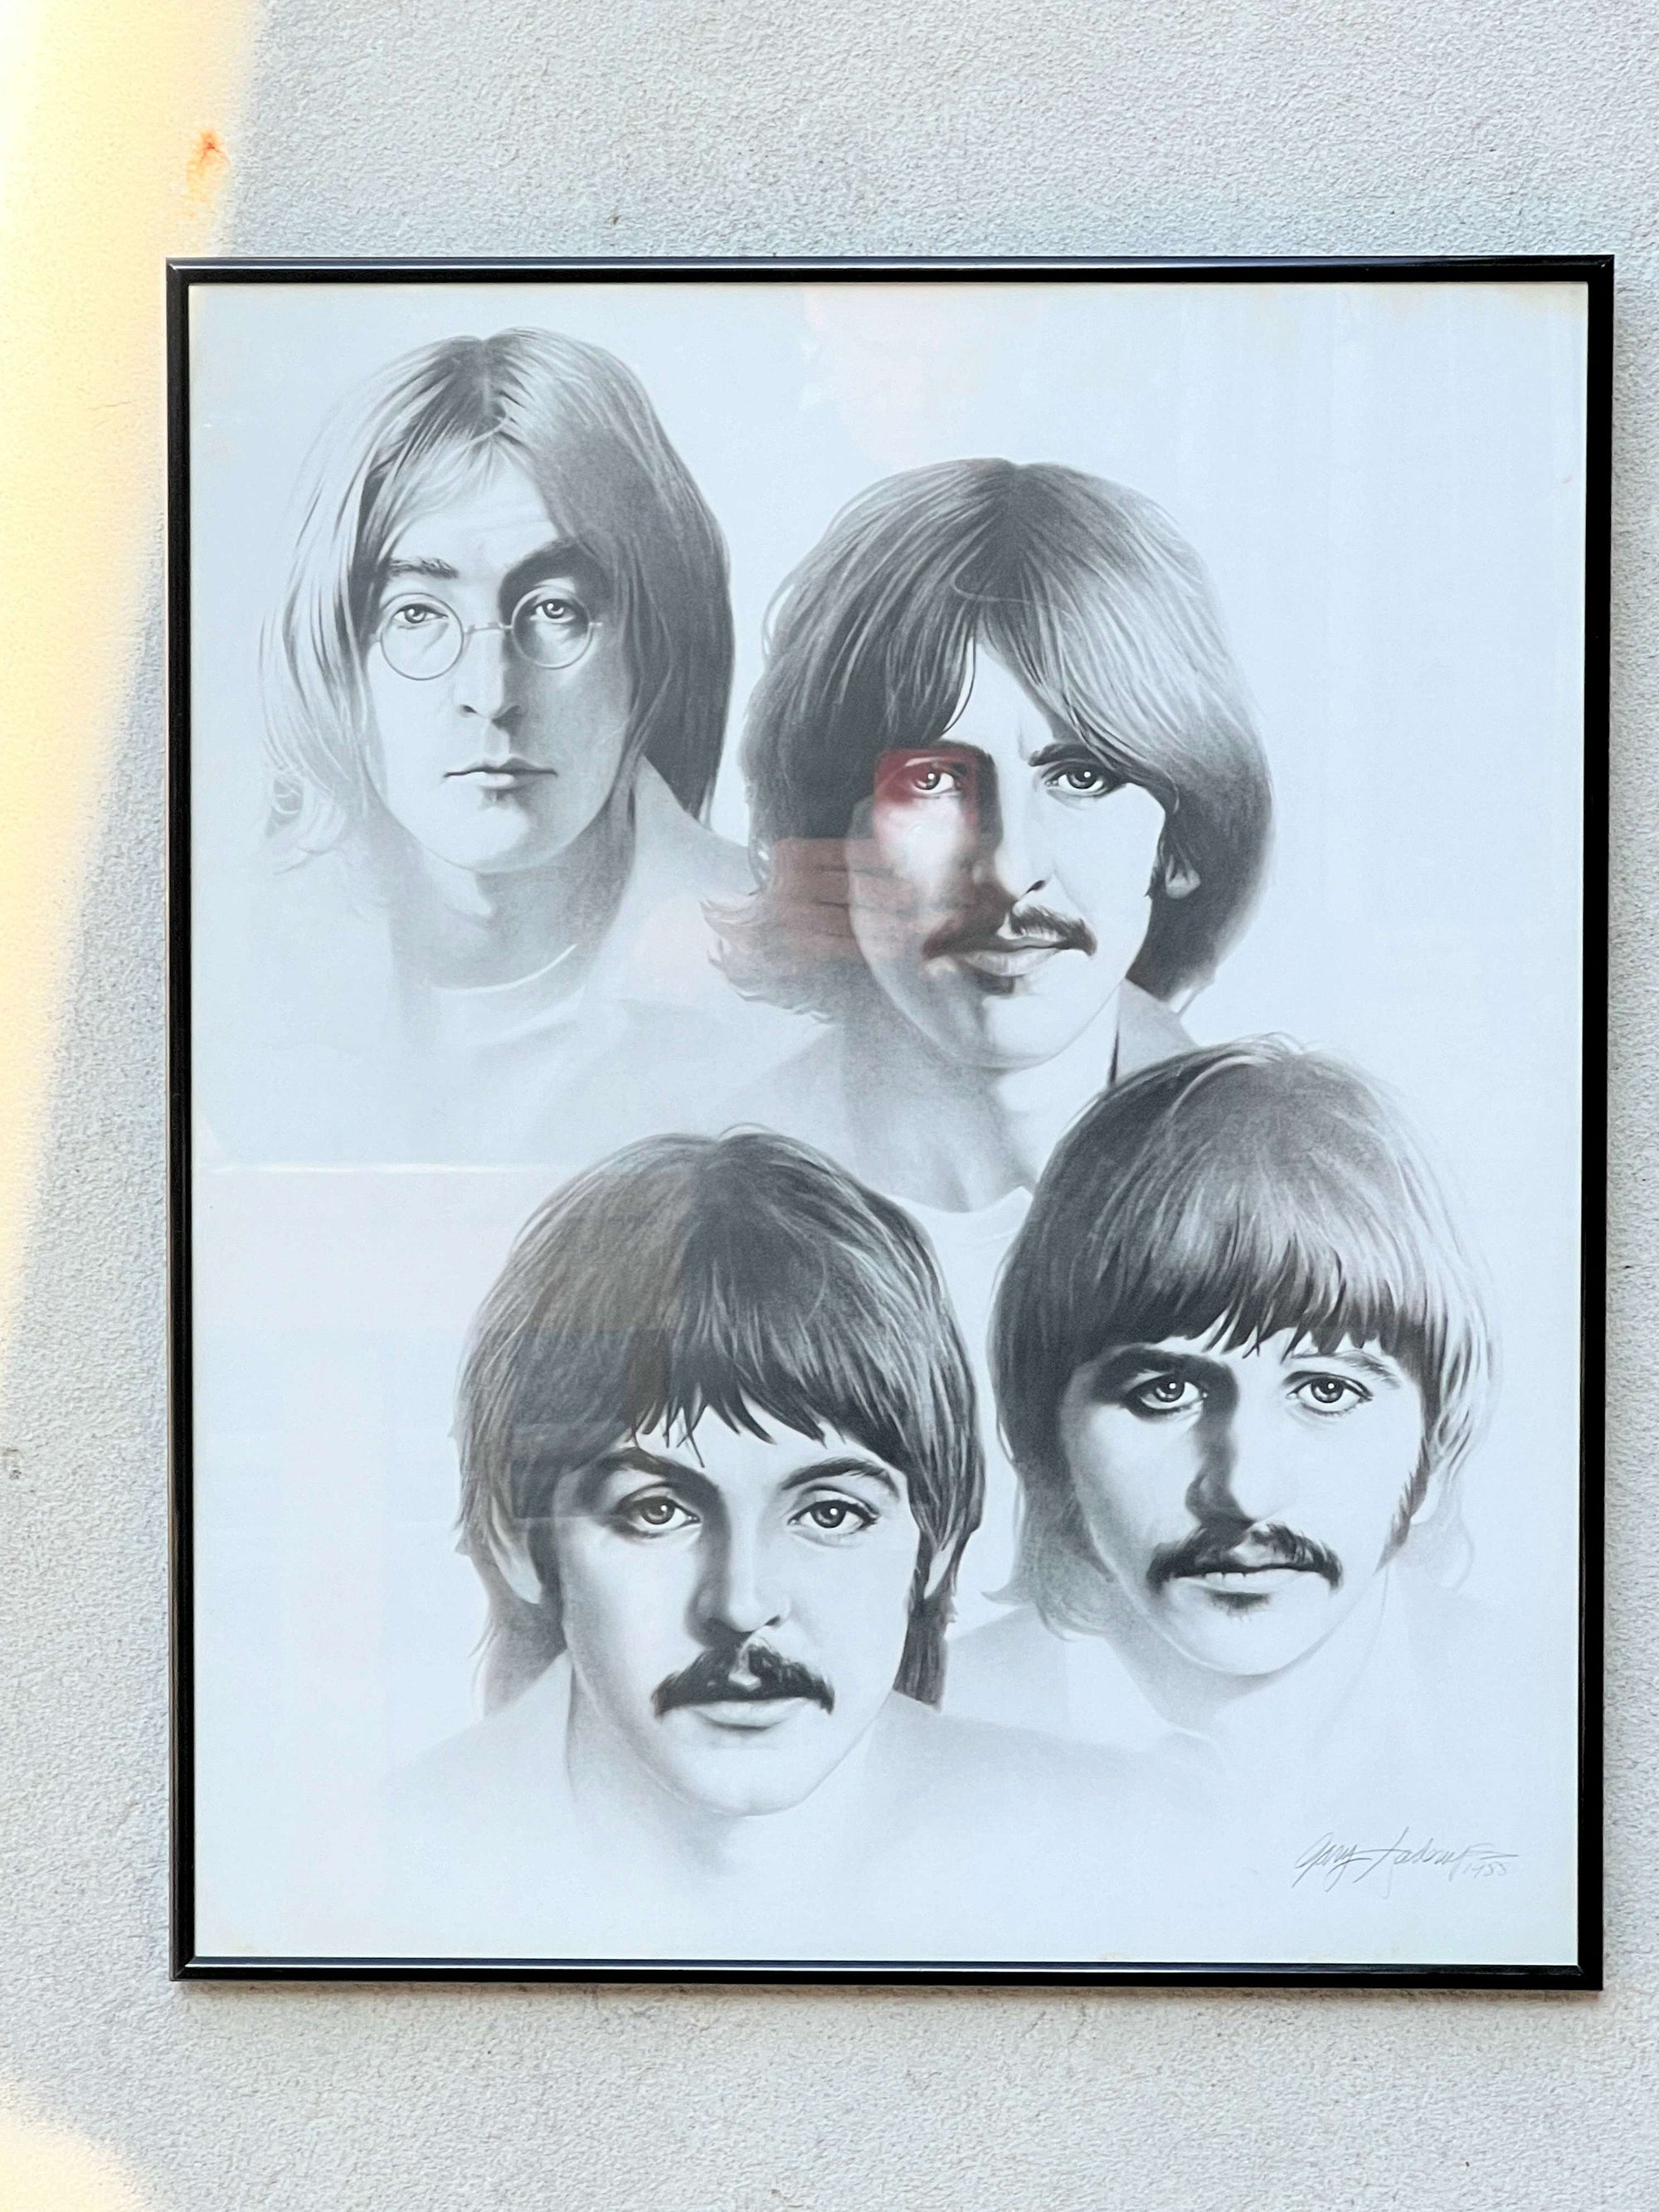 The Beatles by Gary Saderup, Framed Print of Charcoal Drawing, 1988